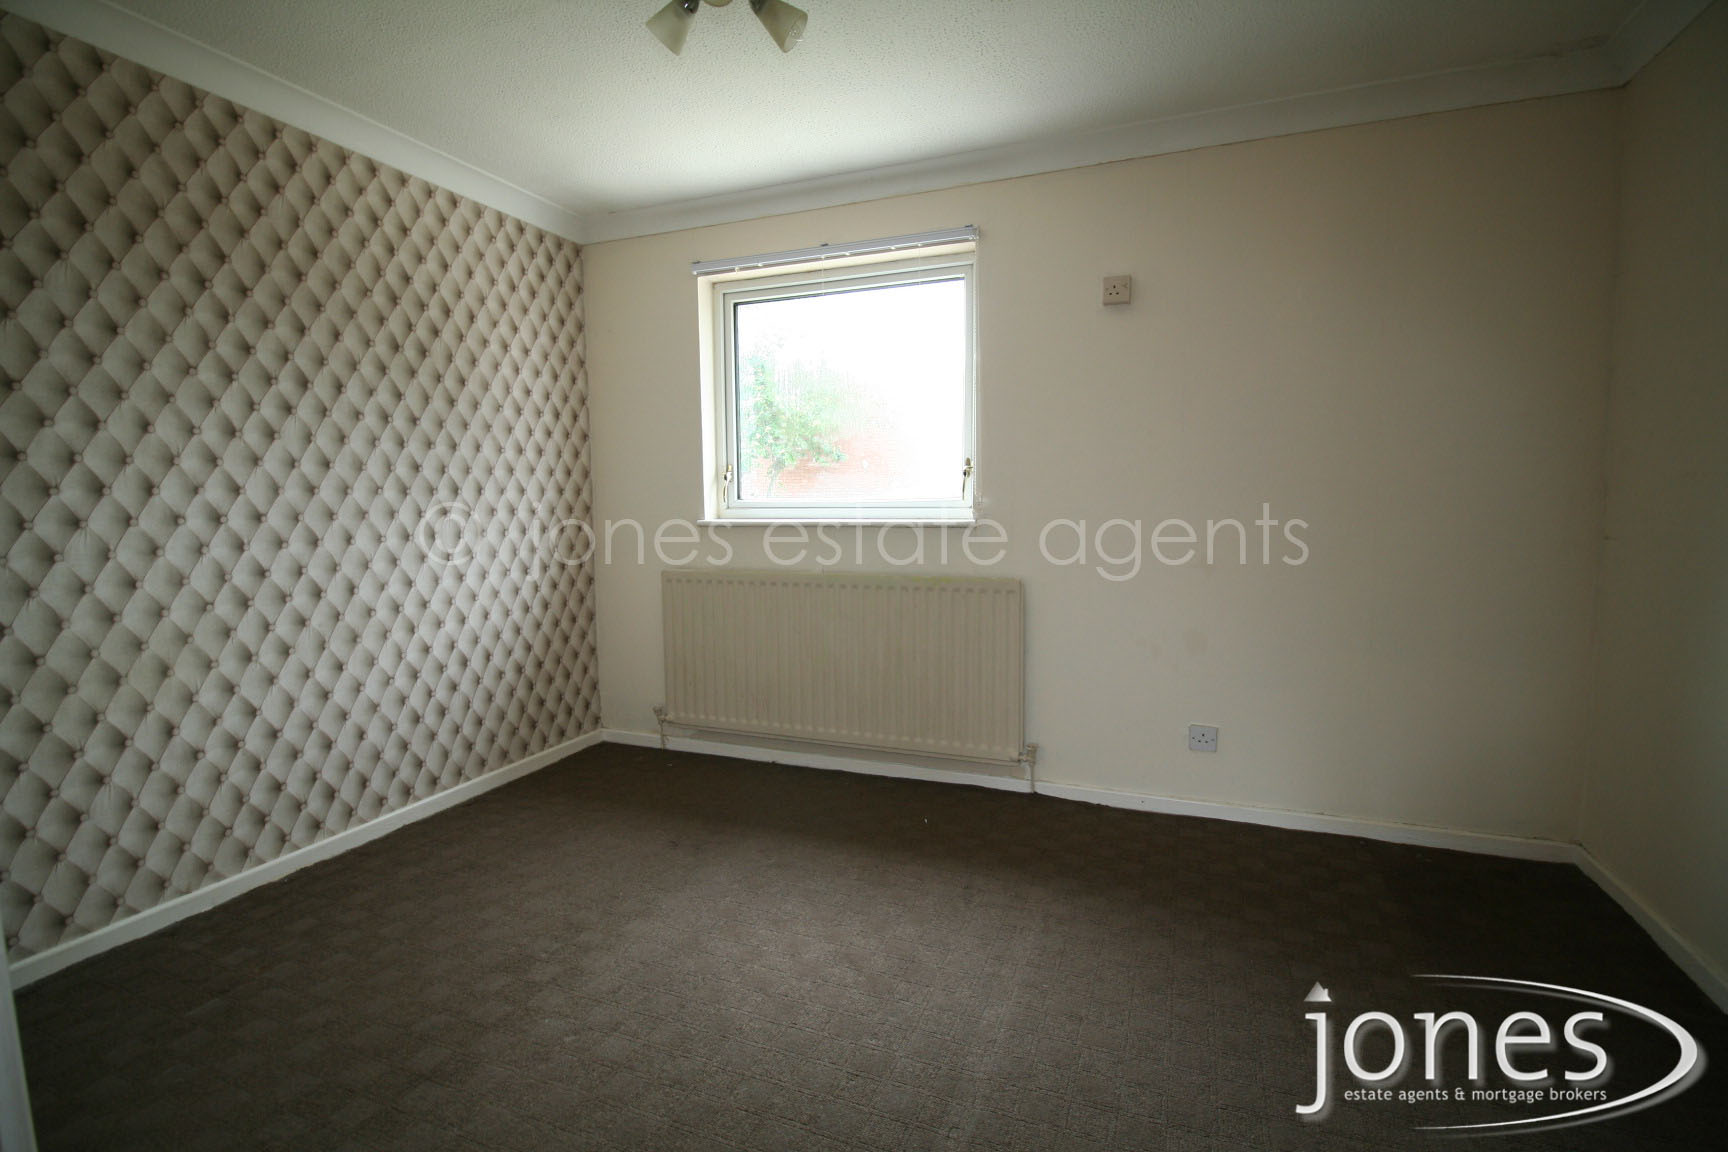 Home for Sale Let - Photo 06 Cuthbert Close, Thornaby, on Tees, TS17 6PJ